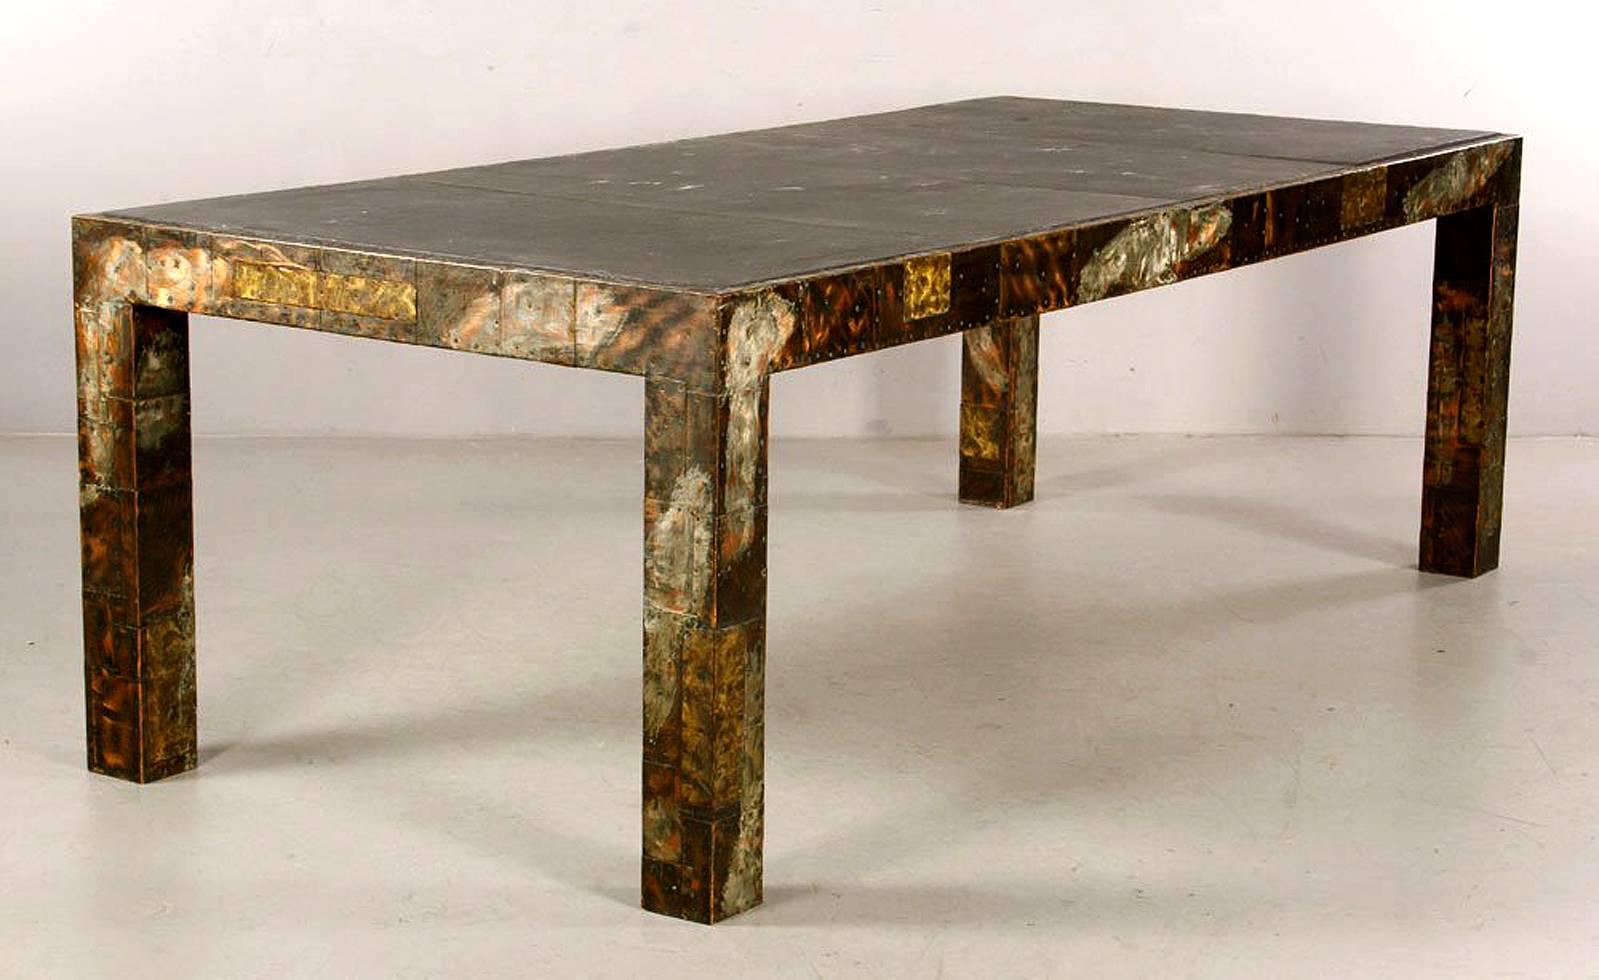 A large-scale one piece dining table in metal patchwork series designed by Paul Evans, circa 1970s. A rare dining table version of Model PE-45, which is normally produced as coffee table. This table features iconic metal patchworks with brass,